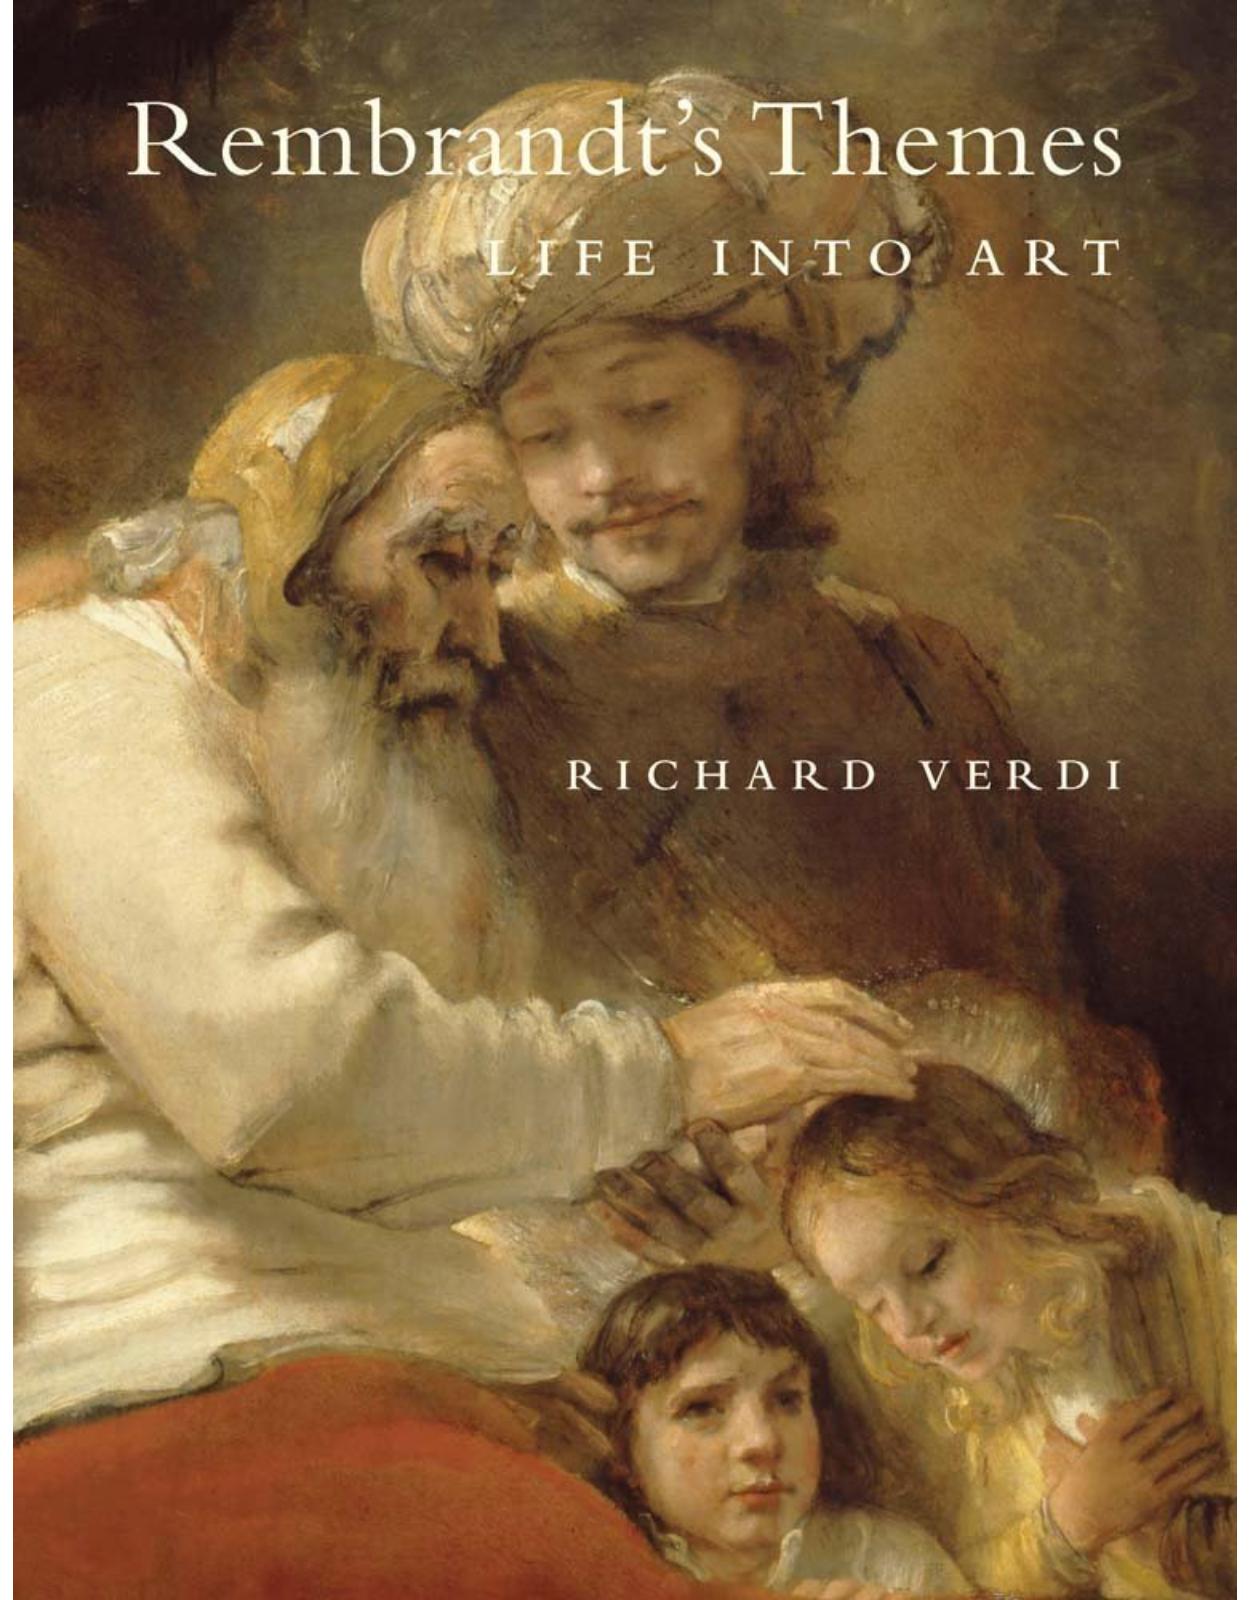 Rembrandt's Themes. Life into Art